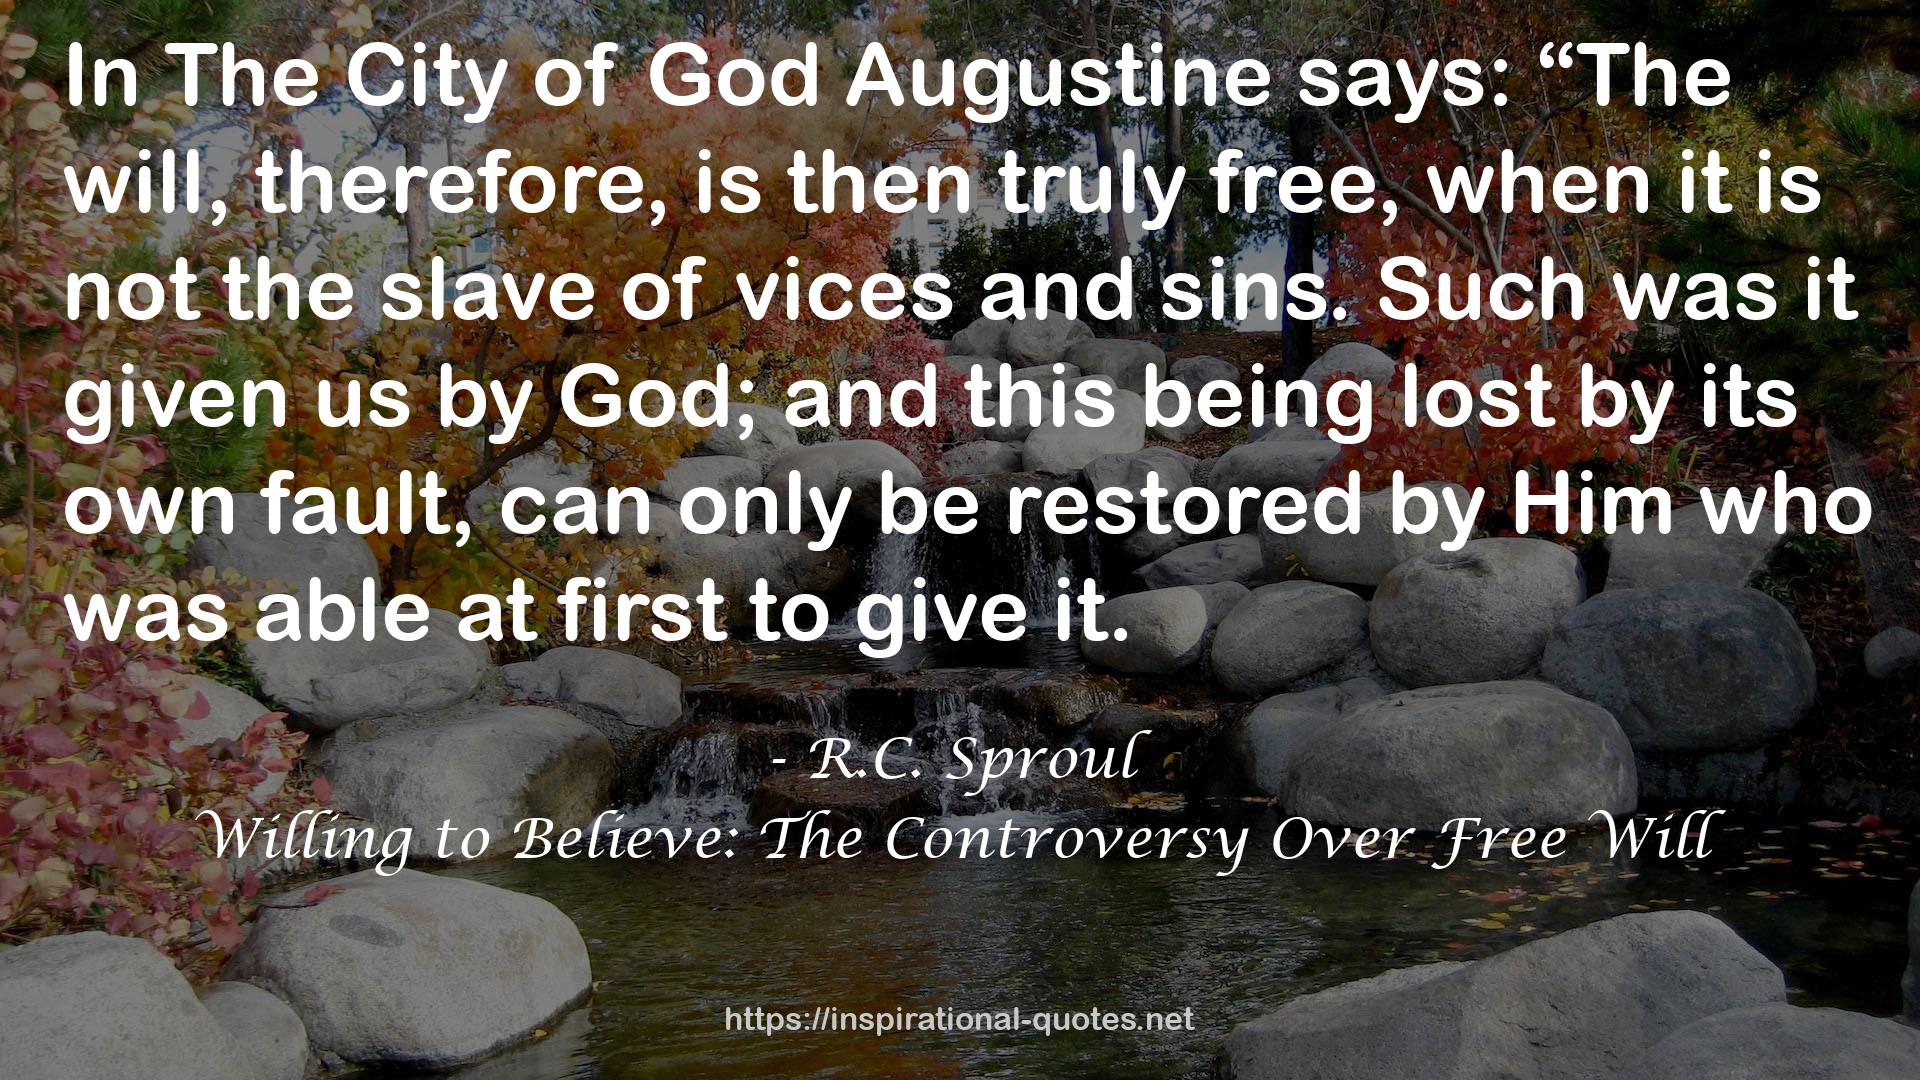 Willing to Believe: The Controversy Over Free Will QUOTES